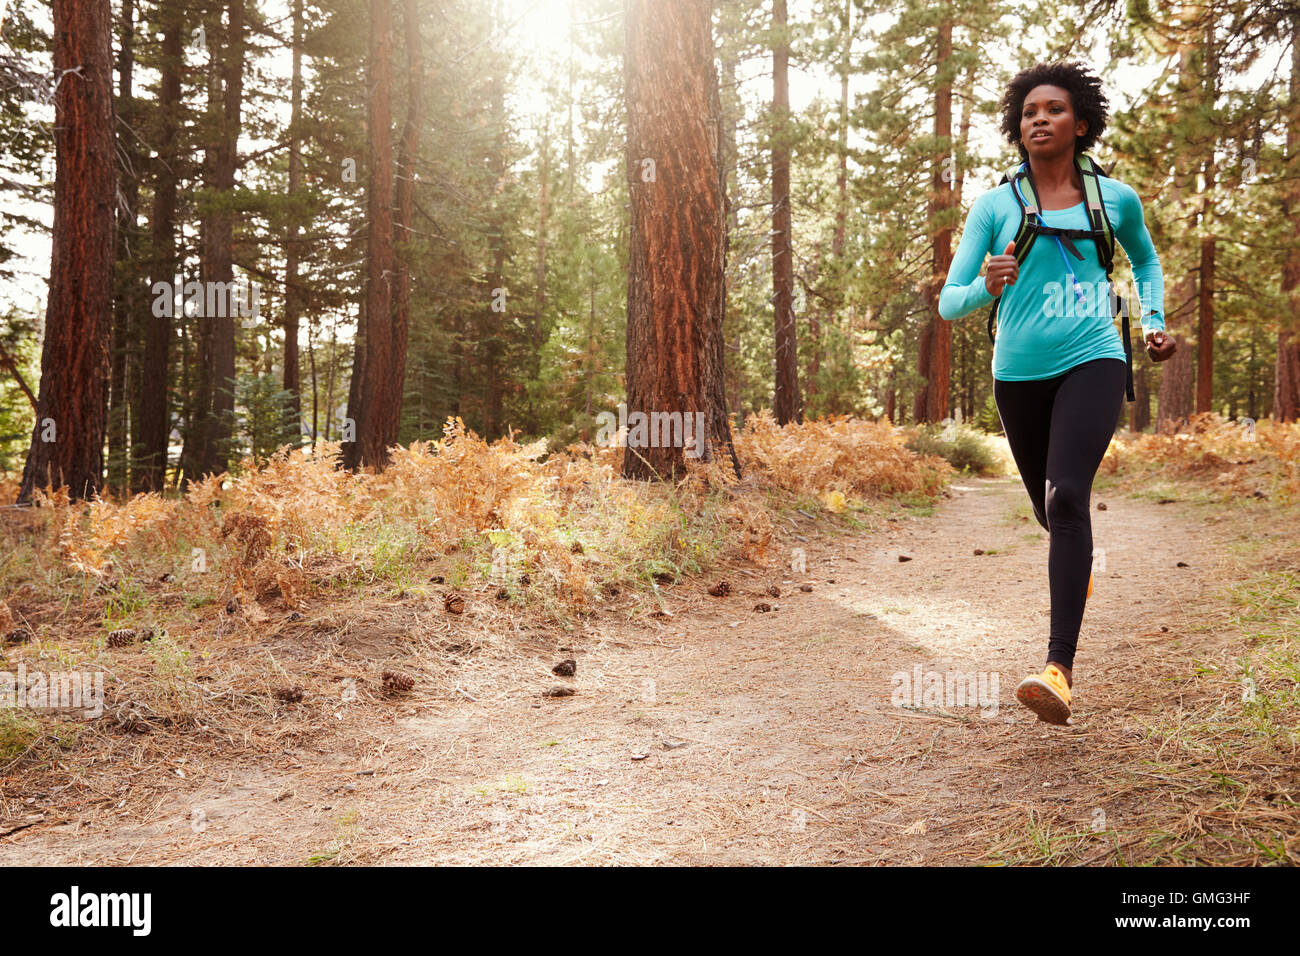 African American ethnicity woman running in a forest Stock Photo